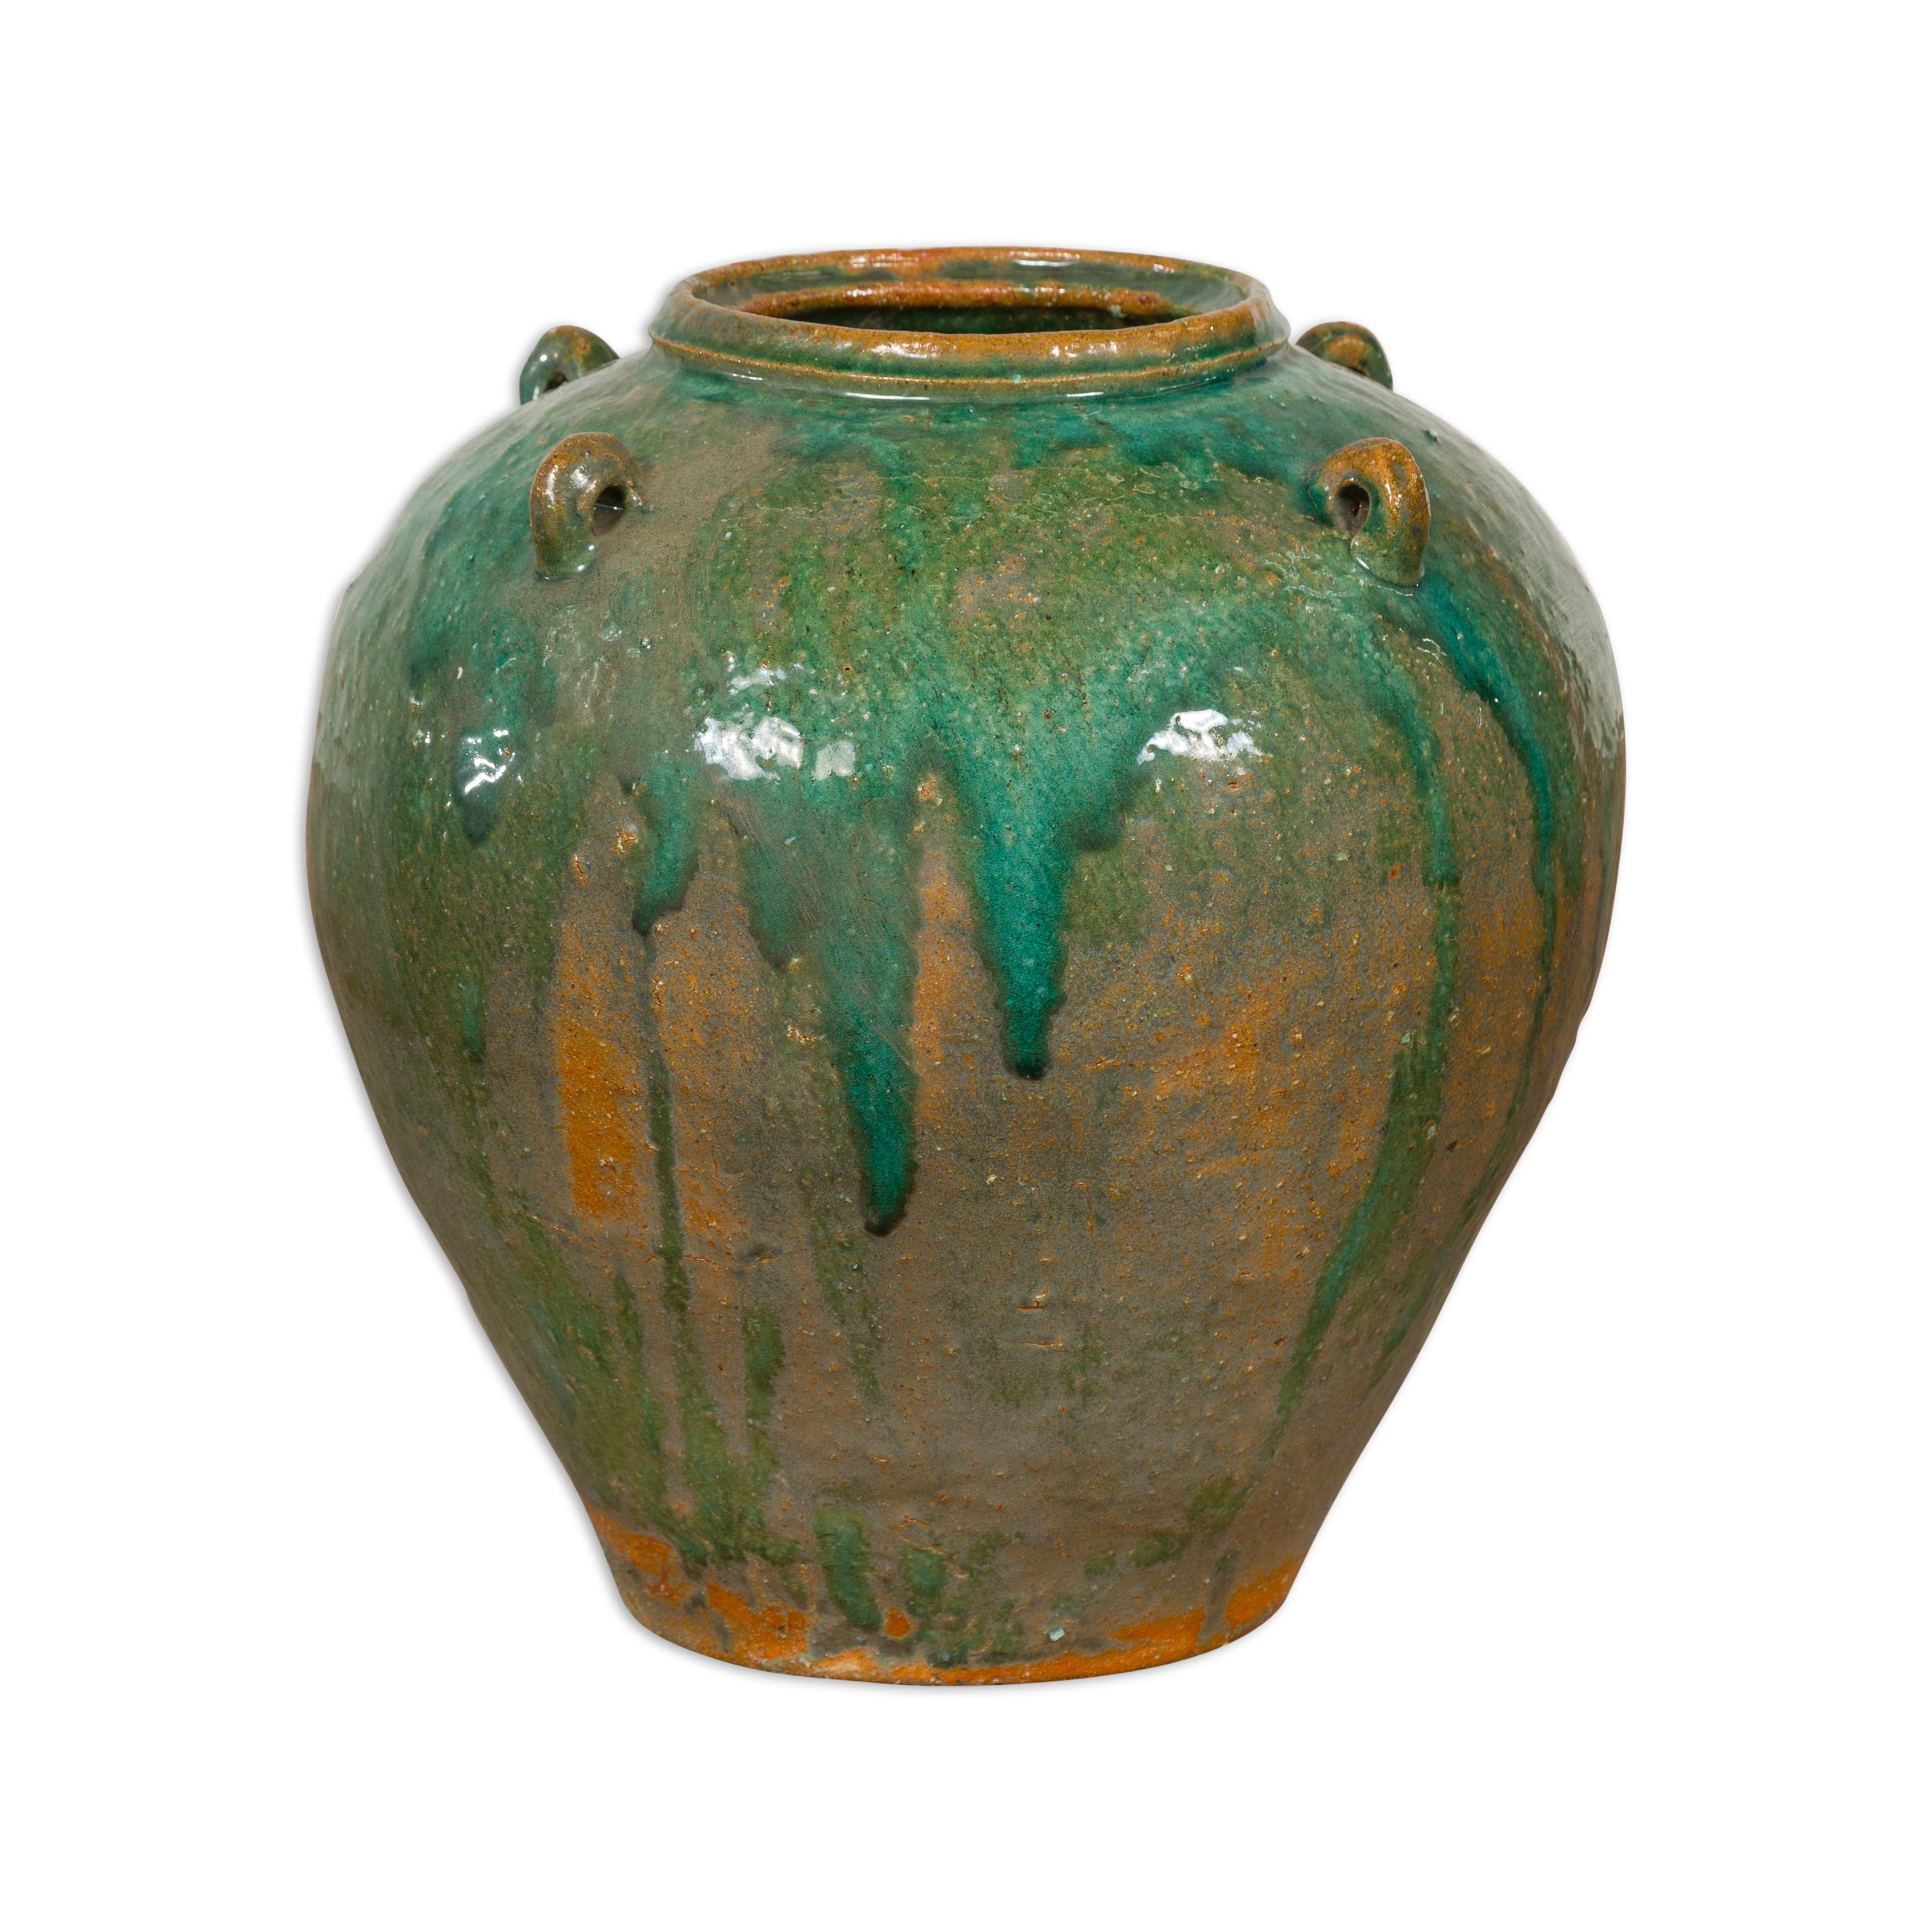 Orange & Brown Antique Jar with Green Drips  In Good Condition For Sale In Yonkers, NY